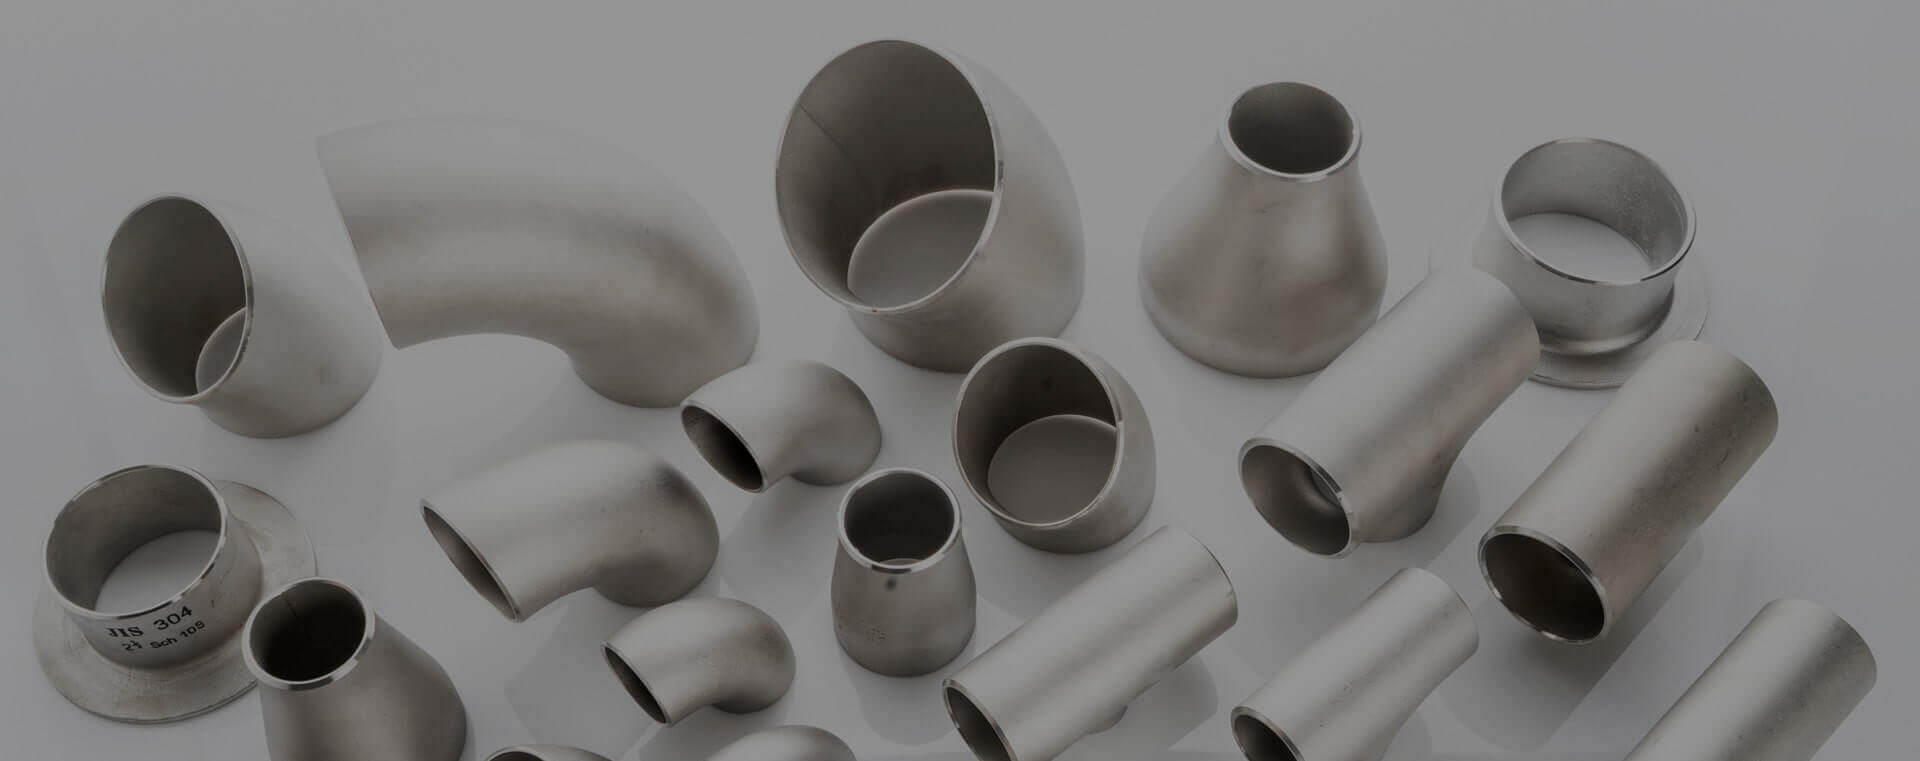 Set of pipe fittings